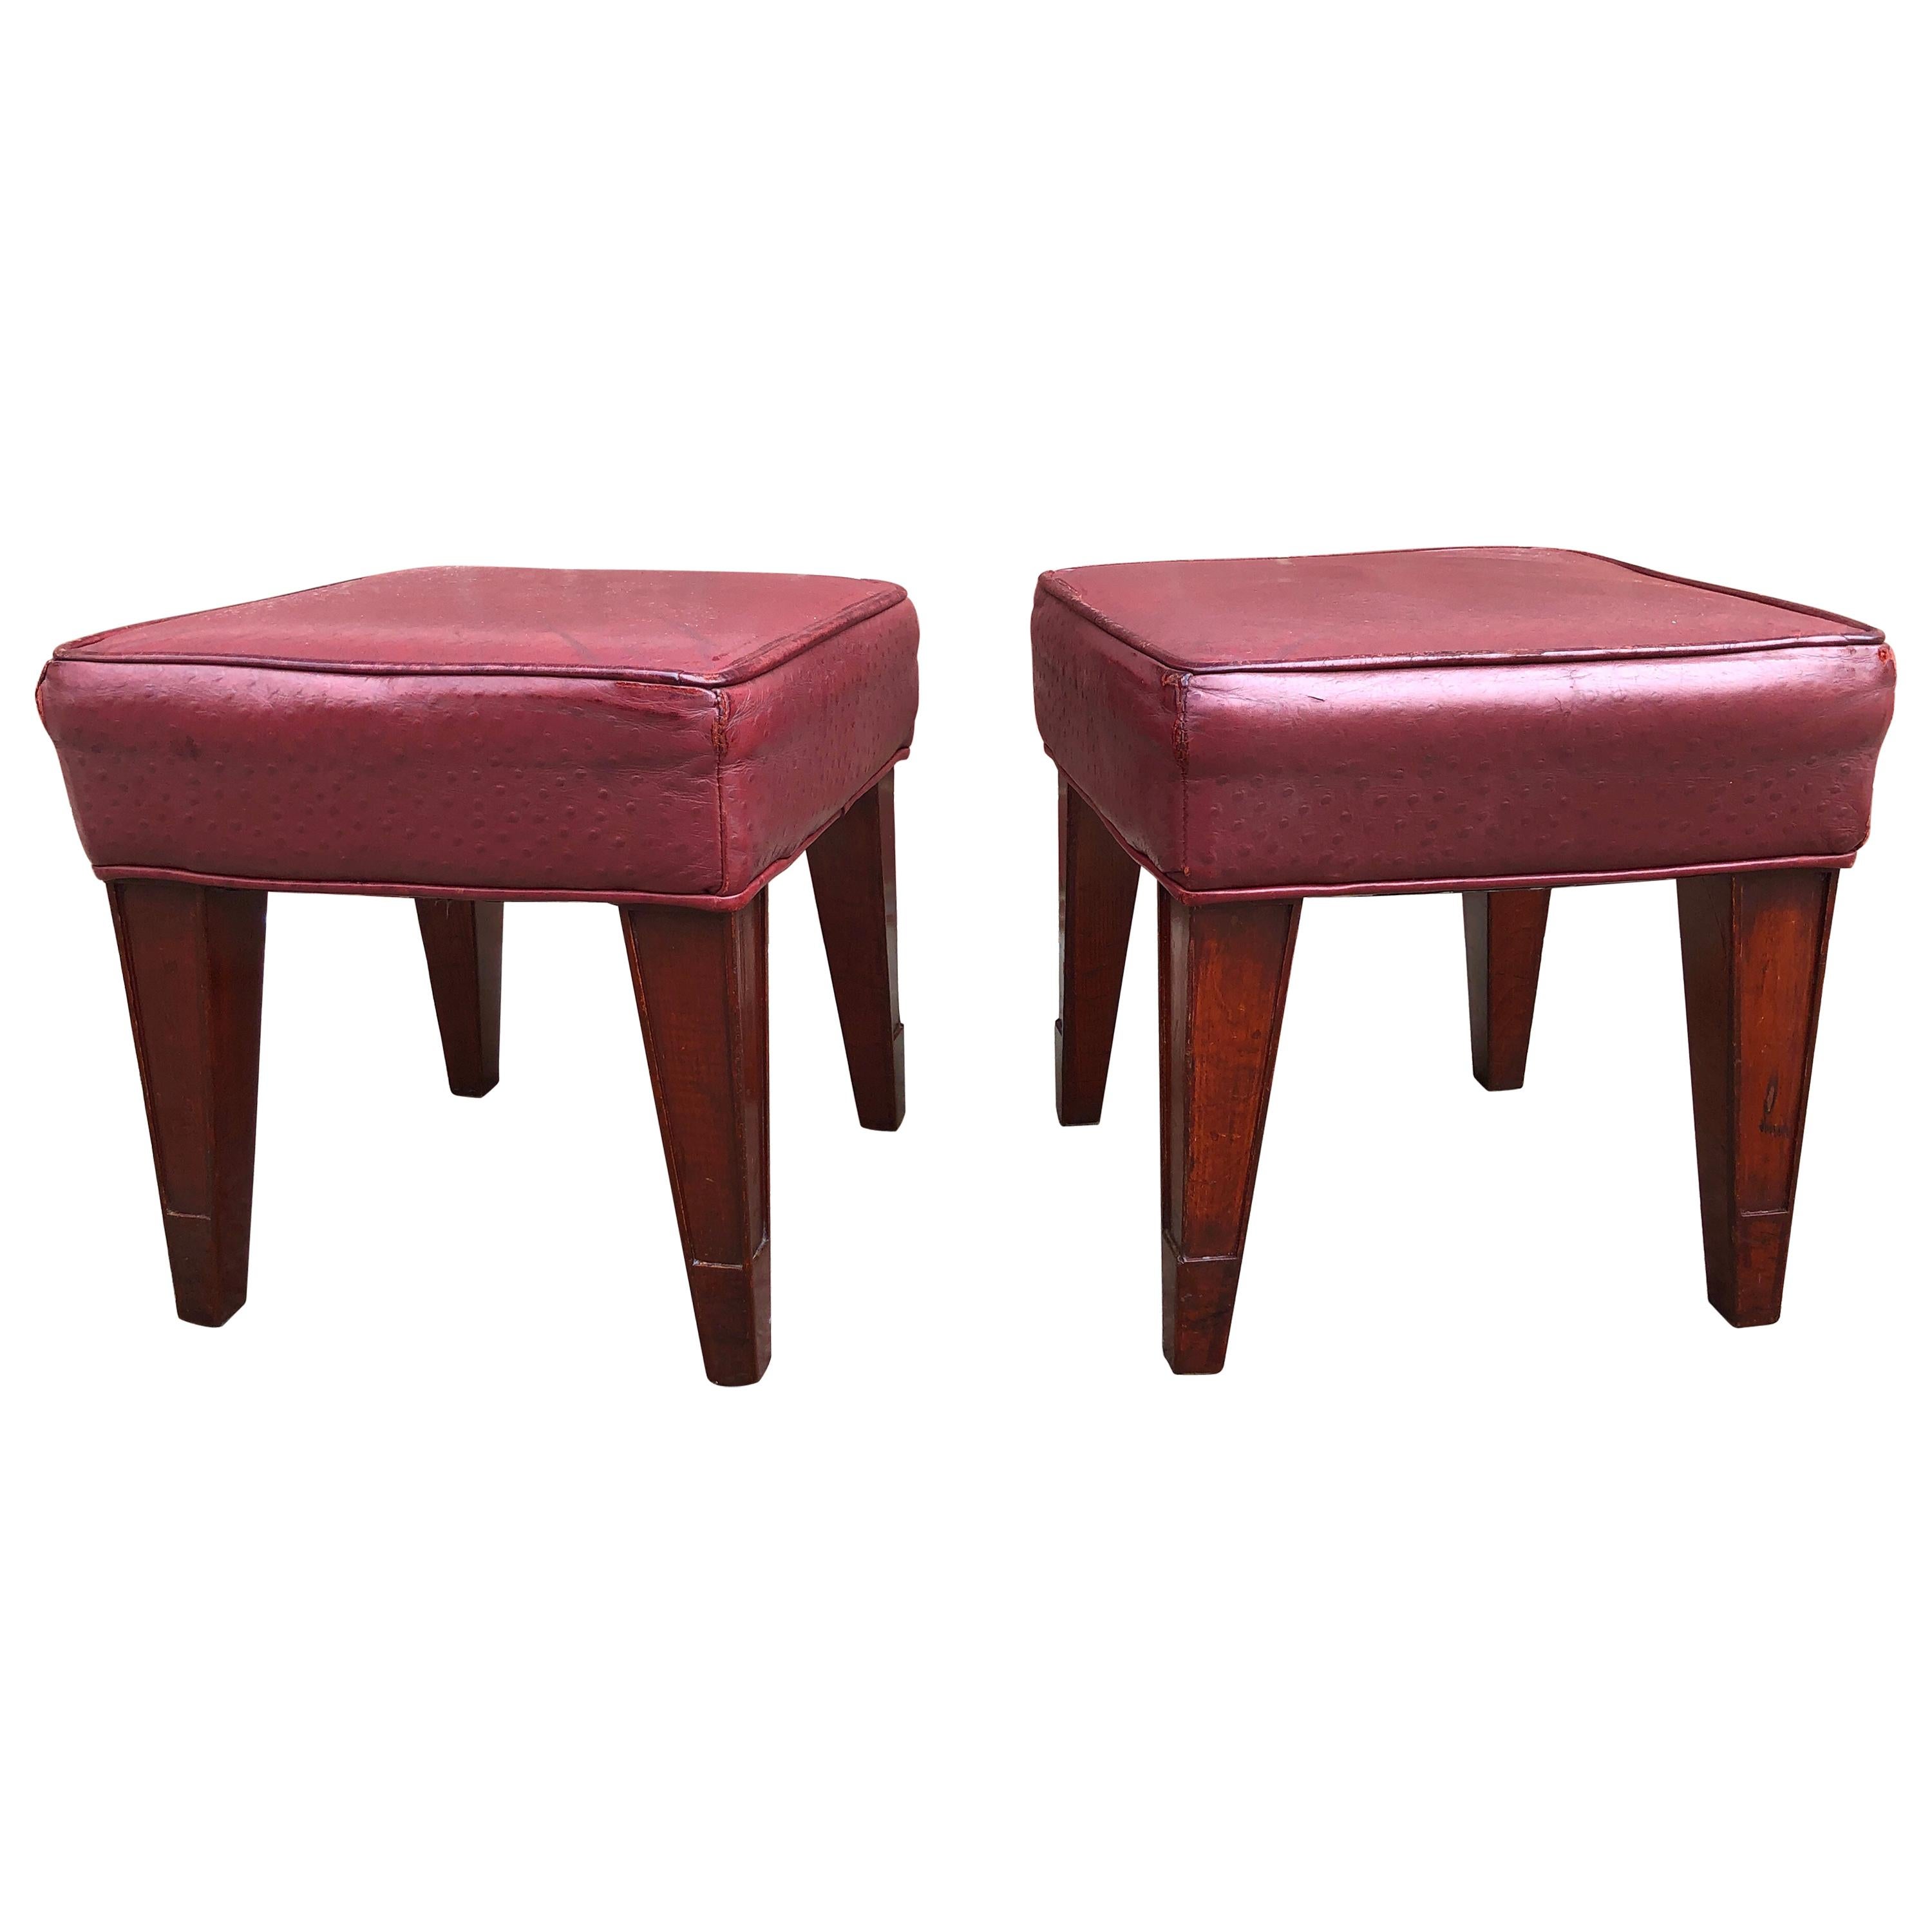 Pair of Philippe Starck Custom Stools from the Clift Hotel, San Francisco